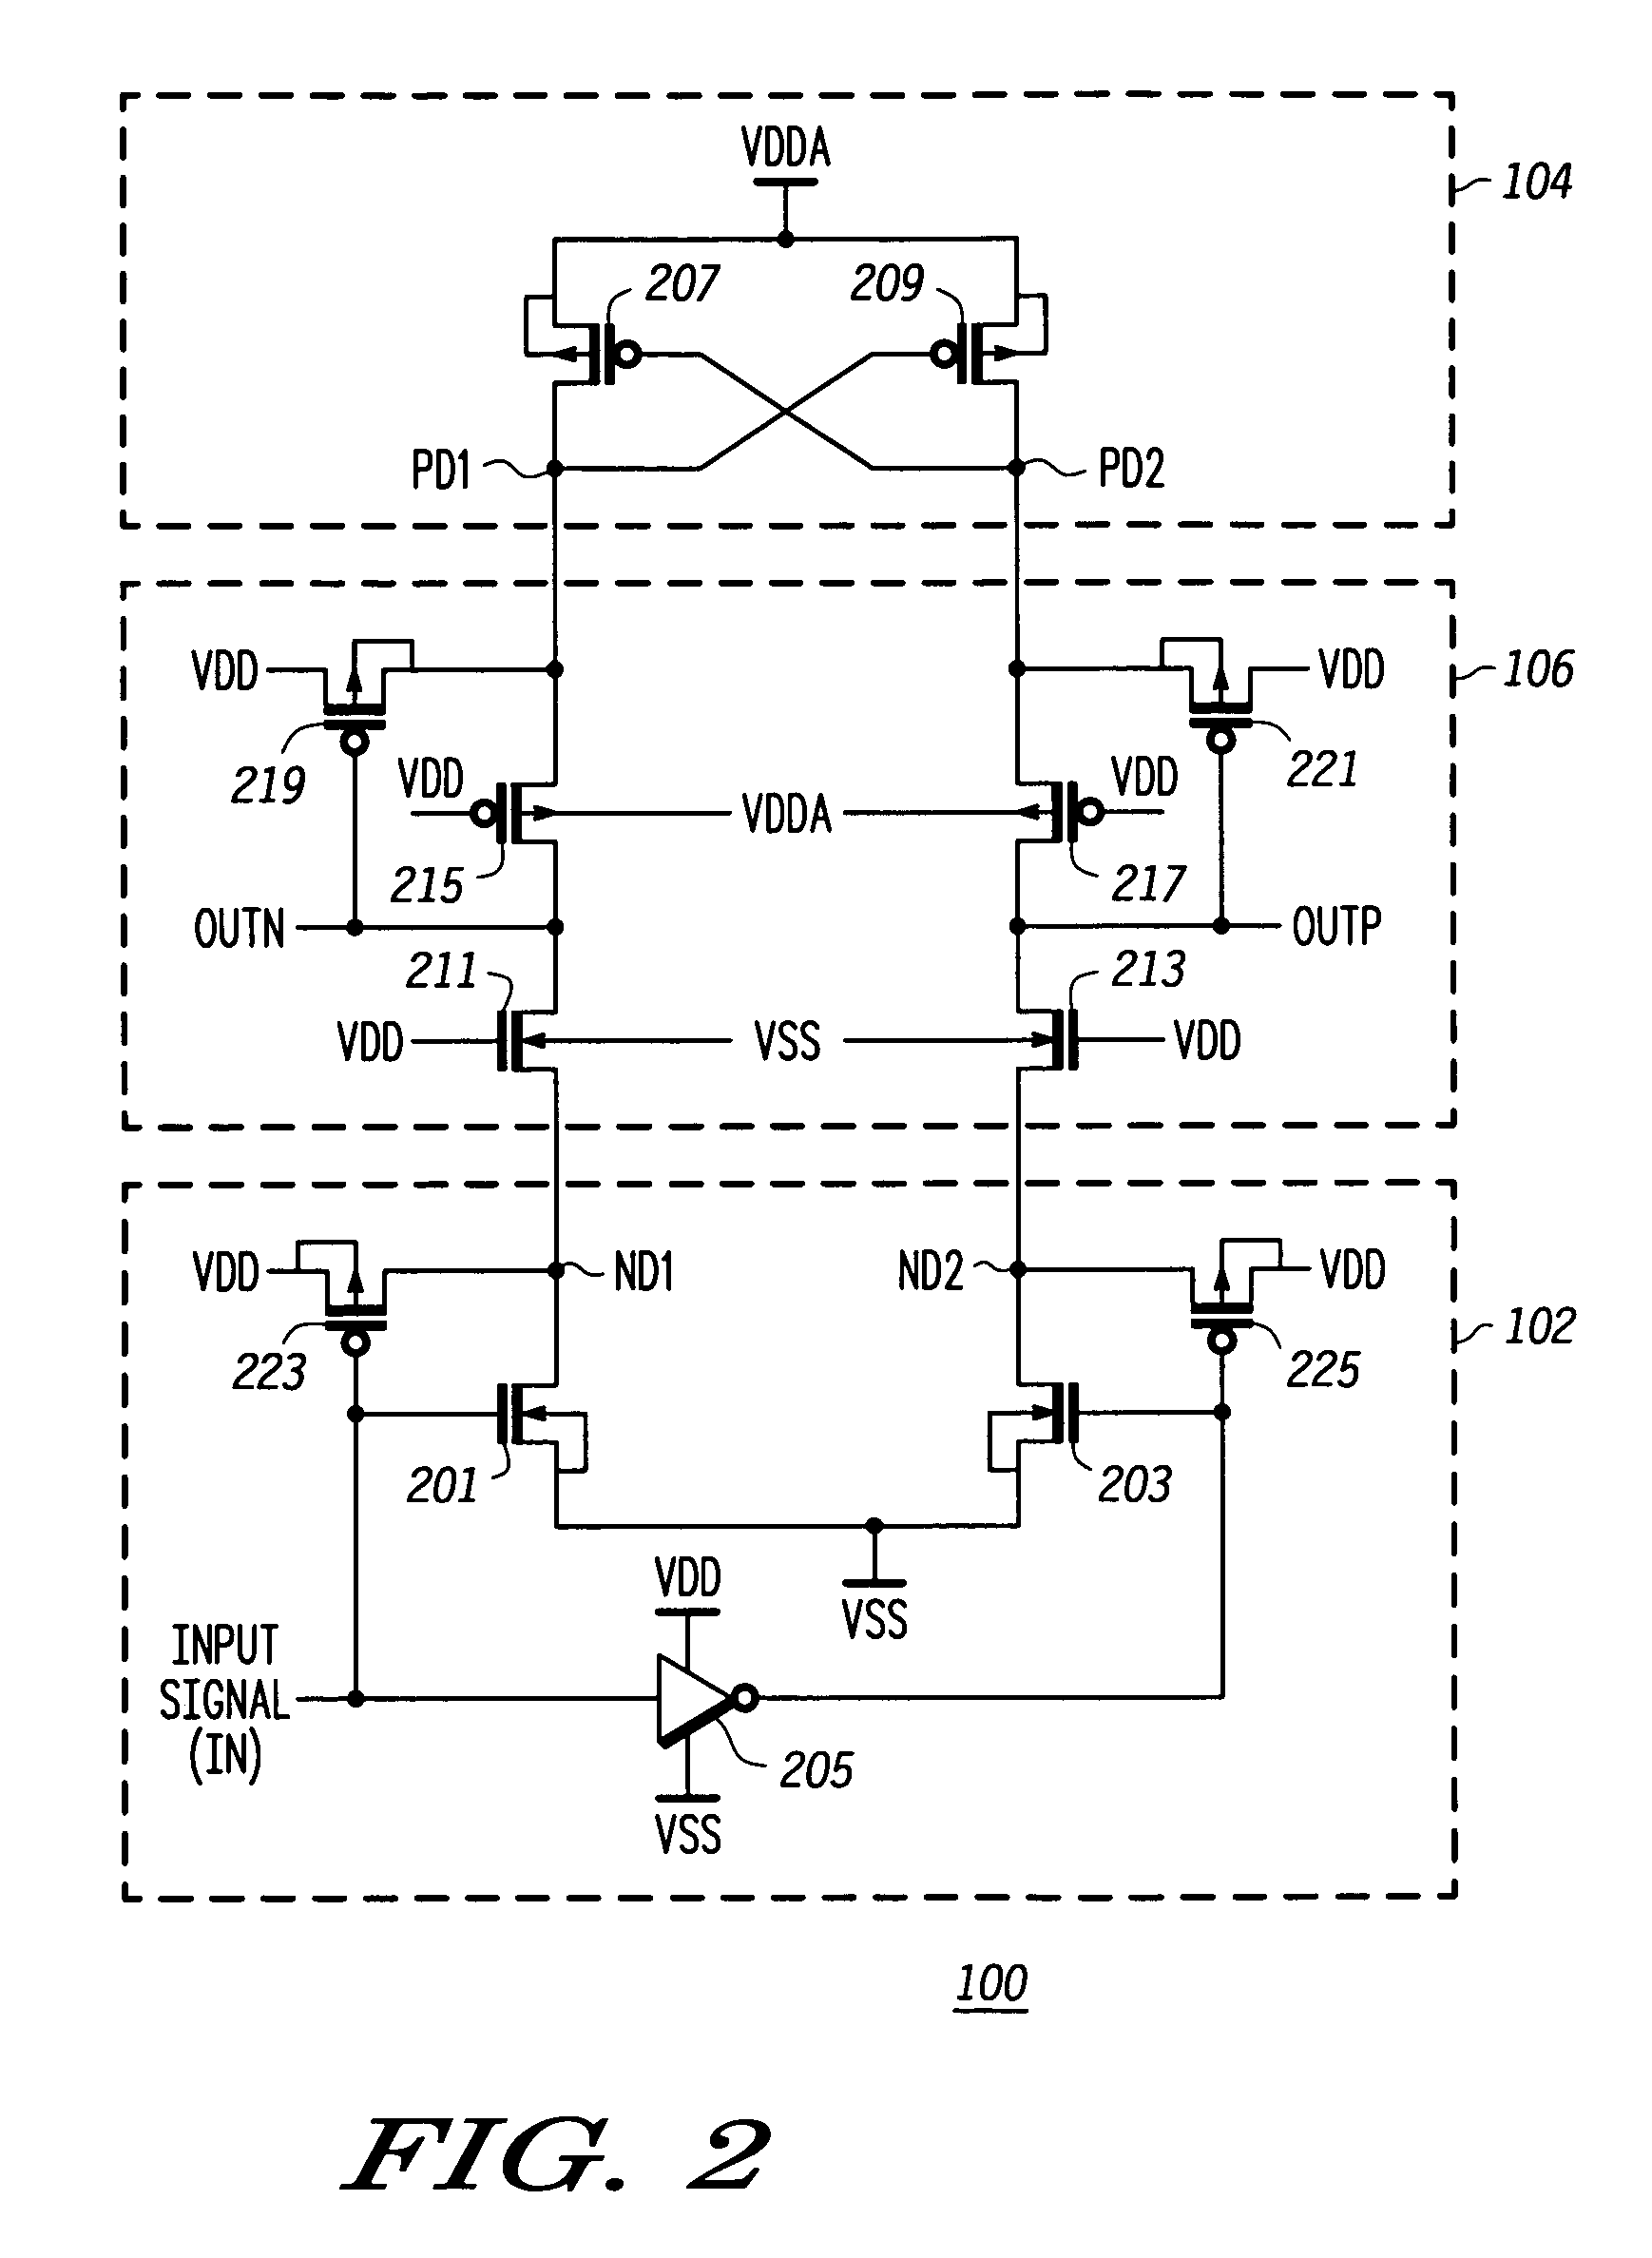 High voltage level converter using low voltage devices